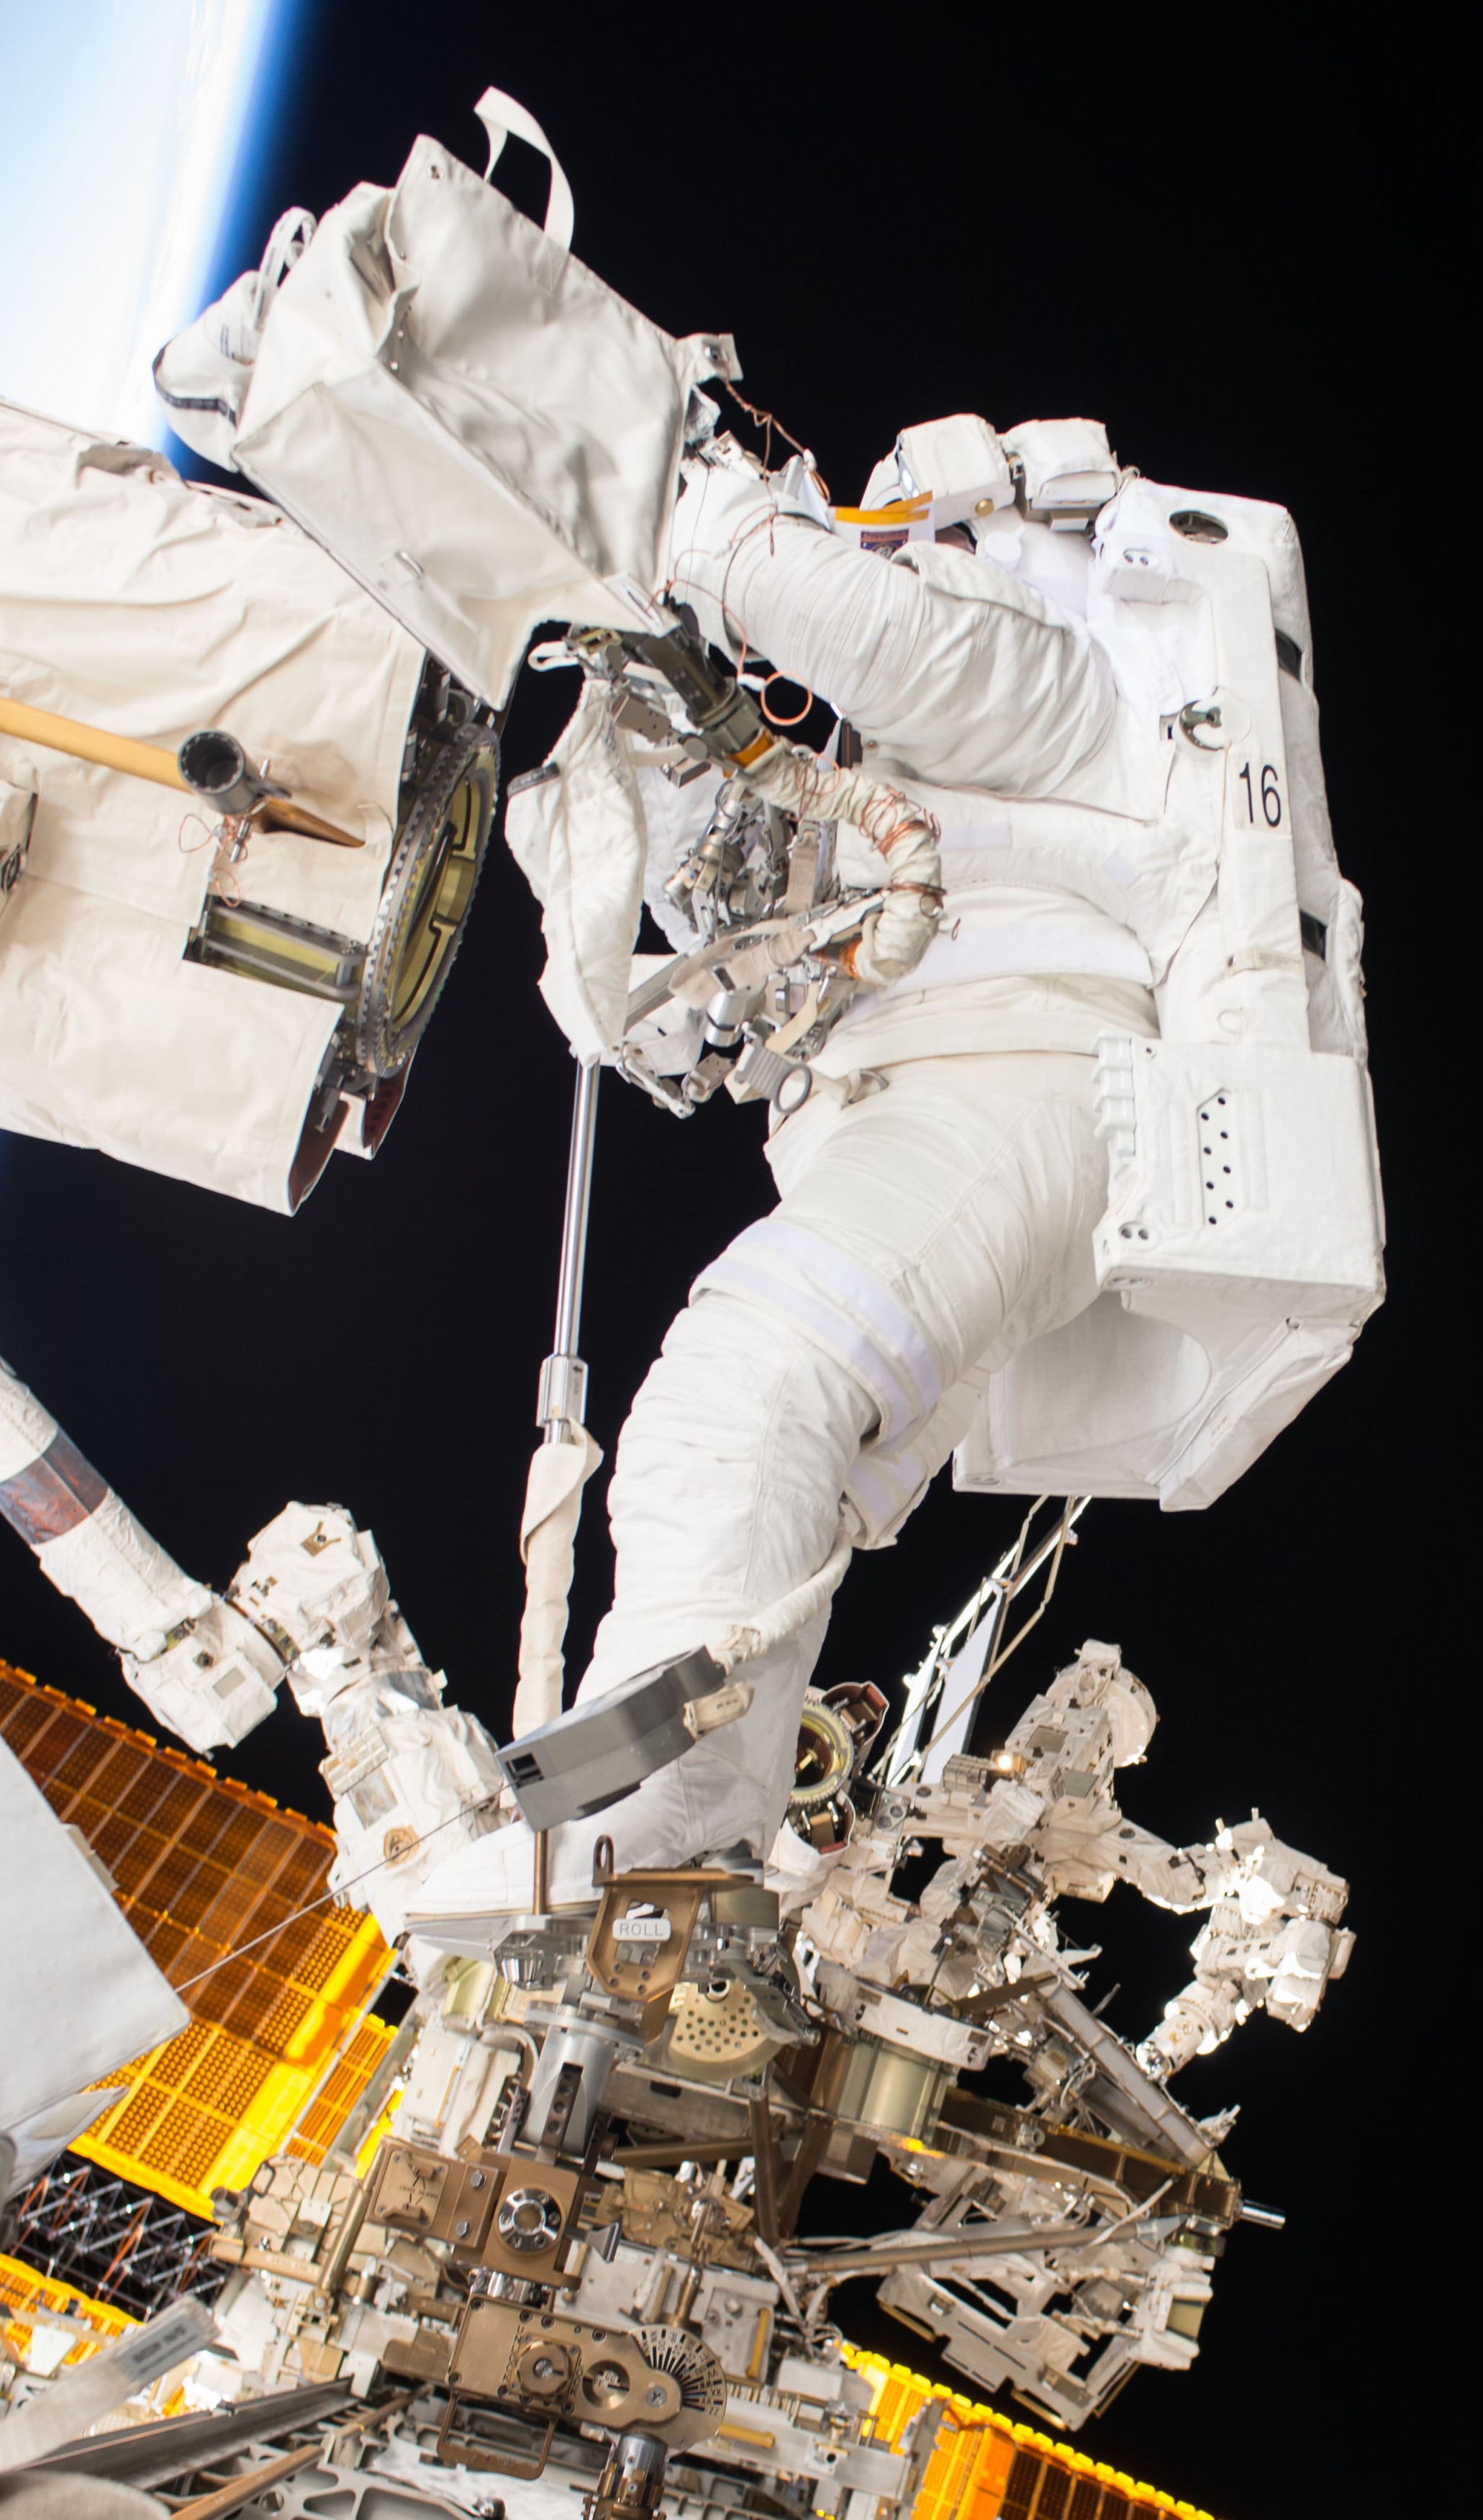 During a spacewalk, Acaba is lubricating the Candarm2 Latching End Effector